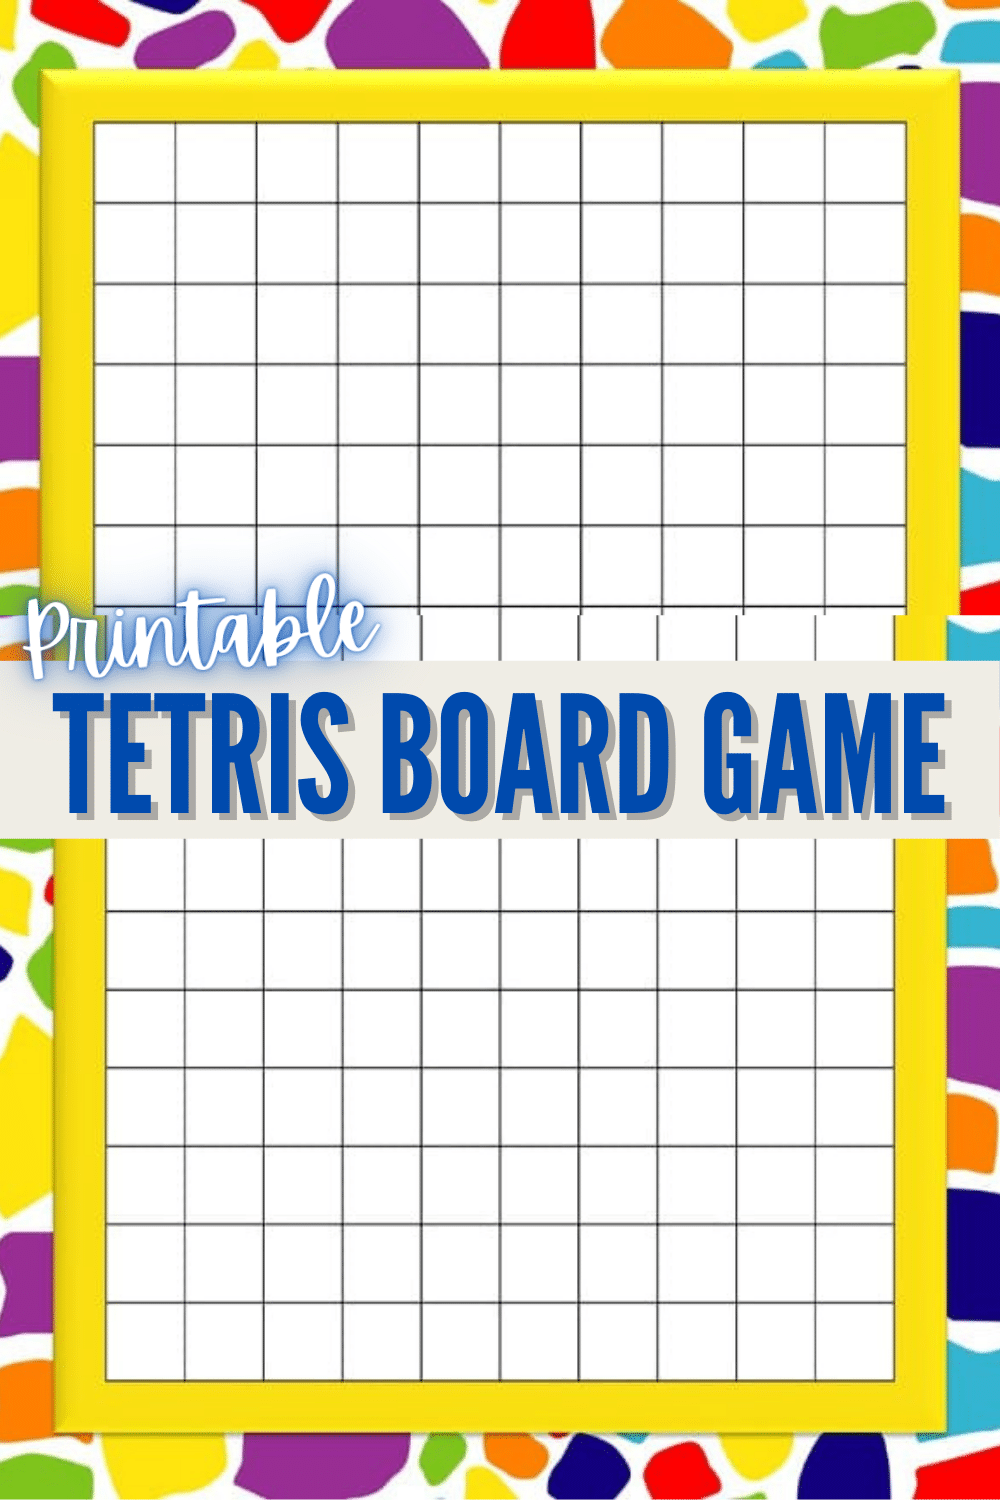 This printable Tetris board game is a great screen-free activity for kids or adults. The kit includes instructions, the board and 2 scoring versions. #printables #printablegames #freeprintables via @wondermomwannab